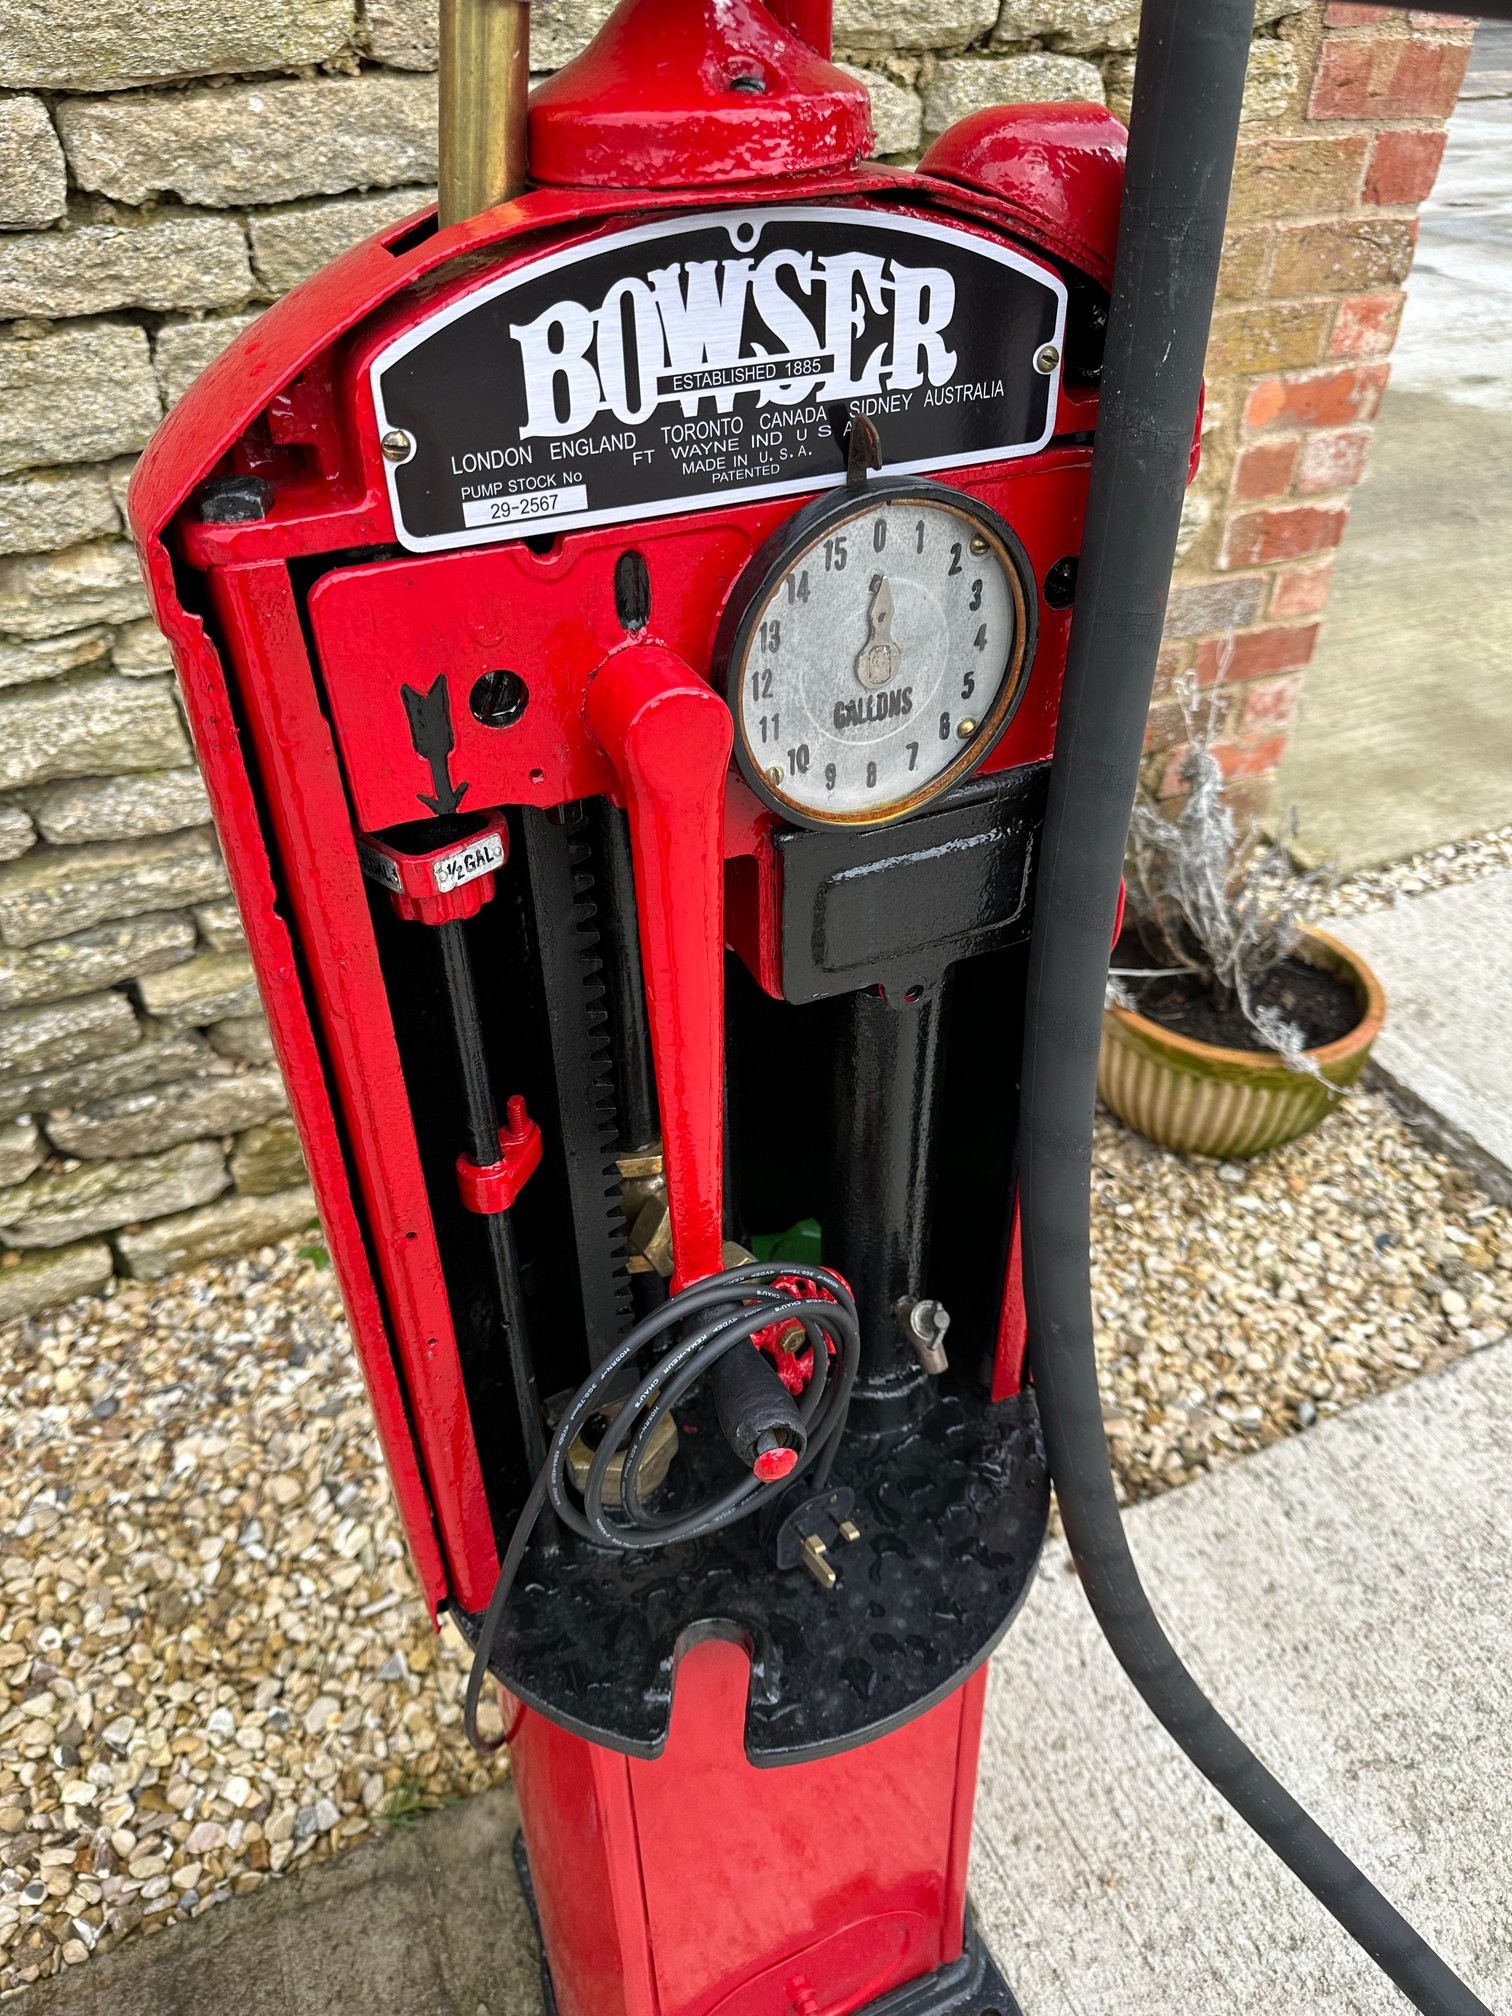 A Bowser hand-operated petrol pump, restored, with hose, nozzle and reproduction plastic petrol pump - Image 2 of 6